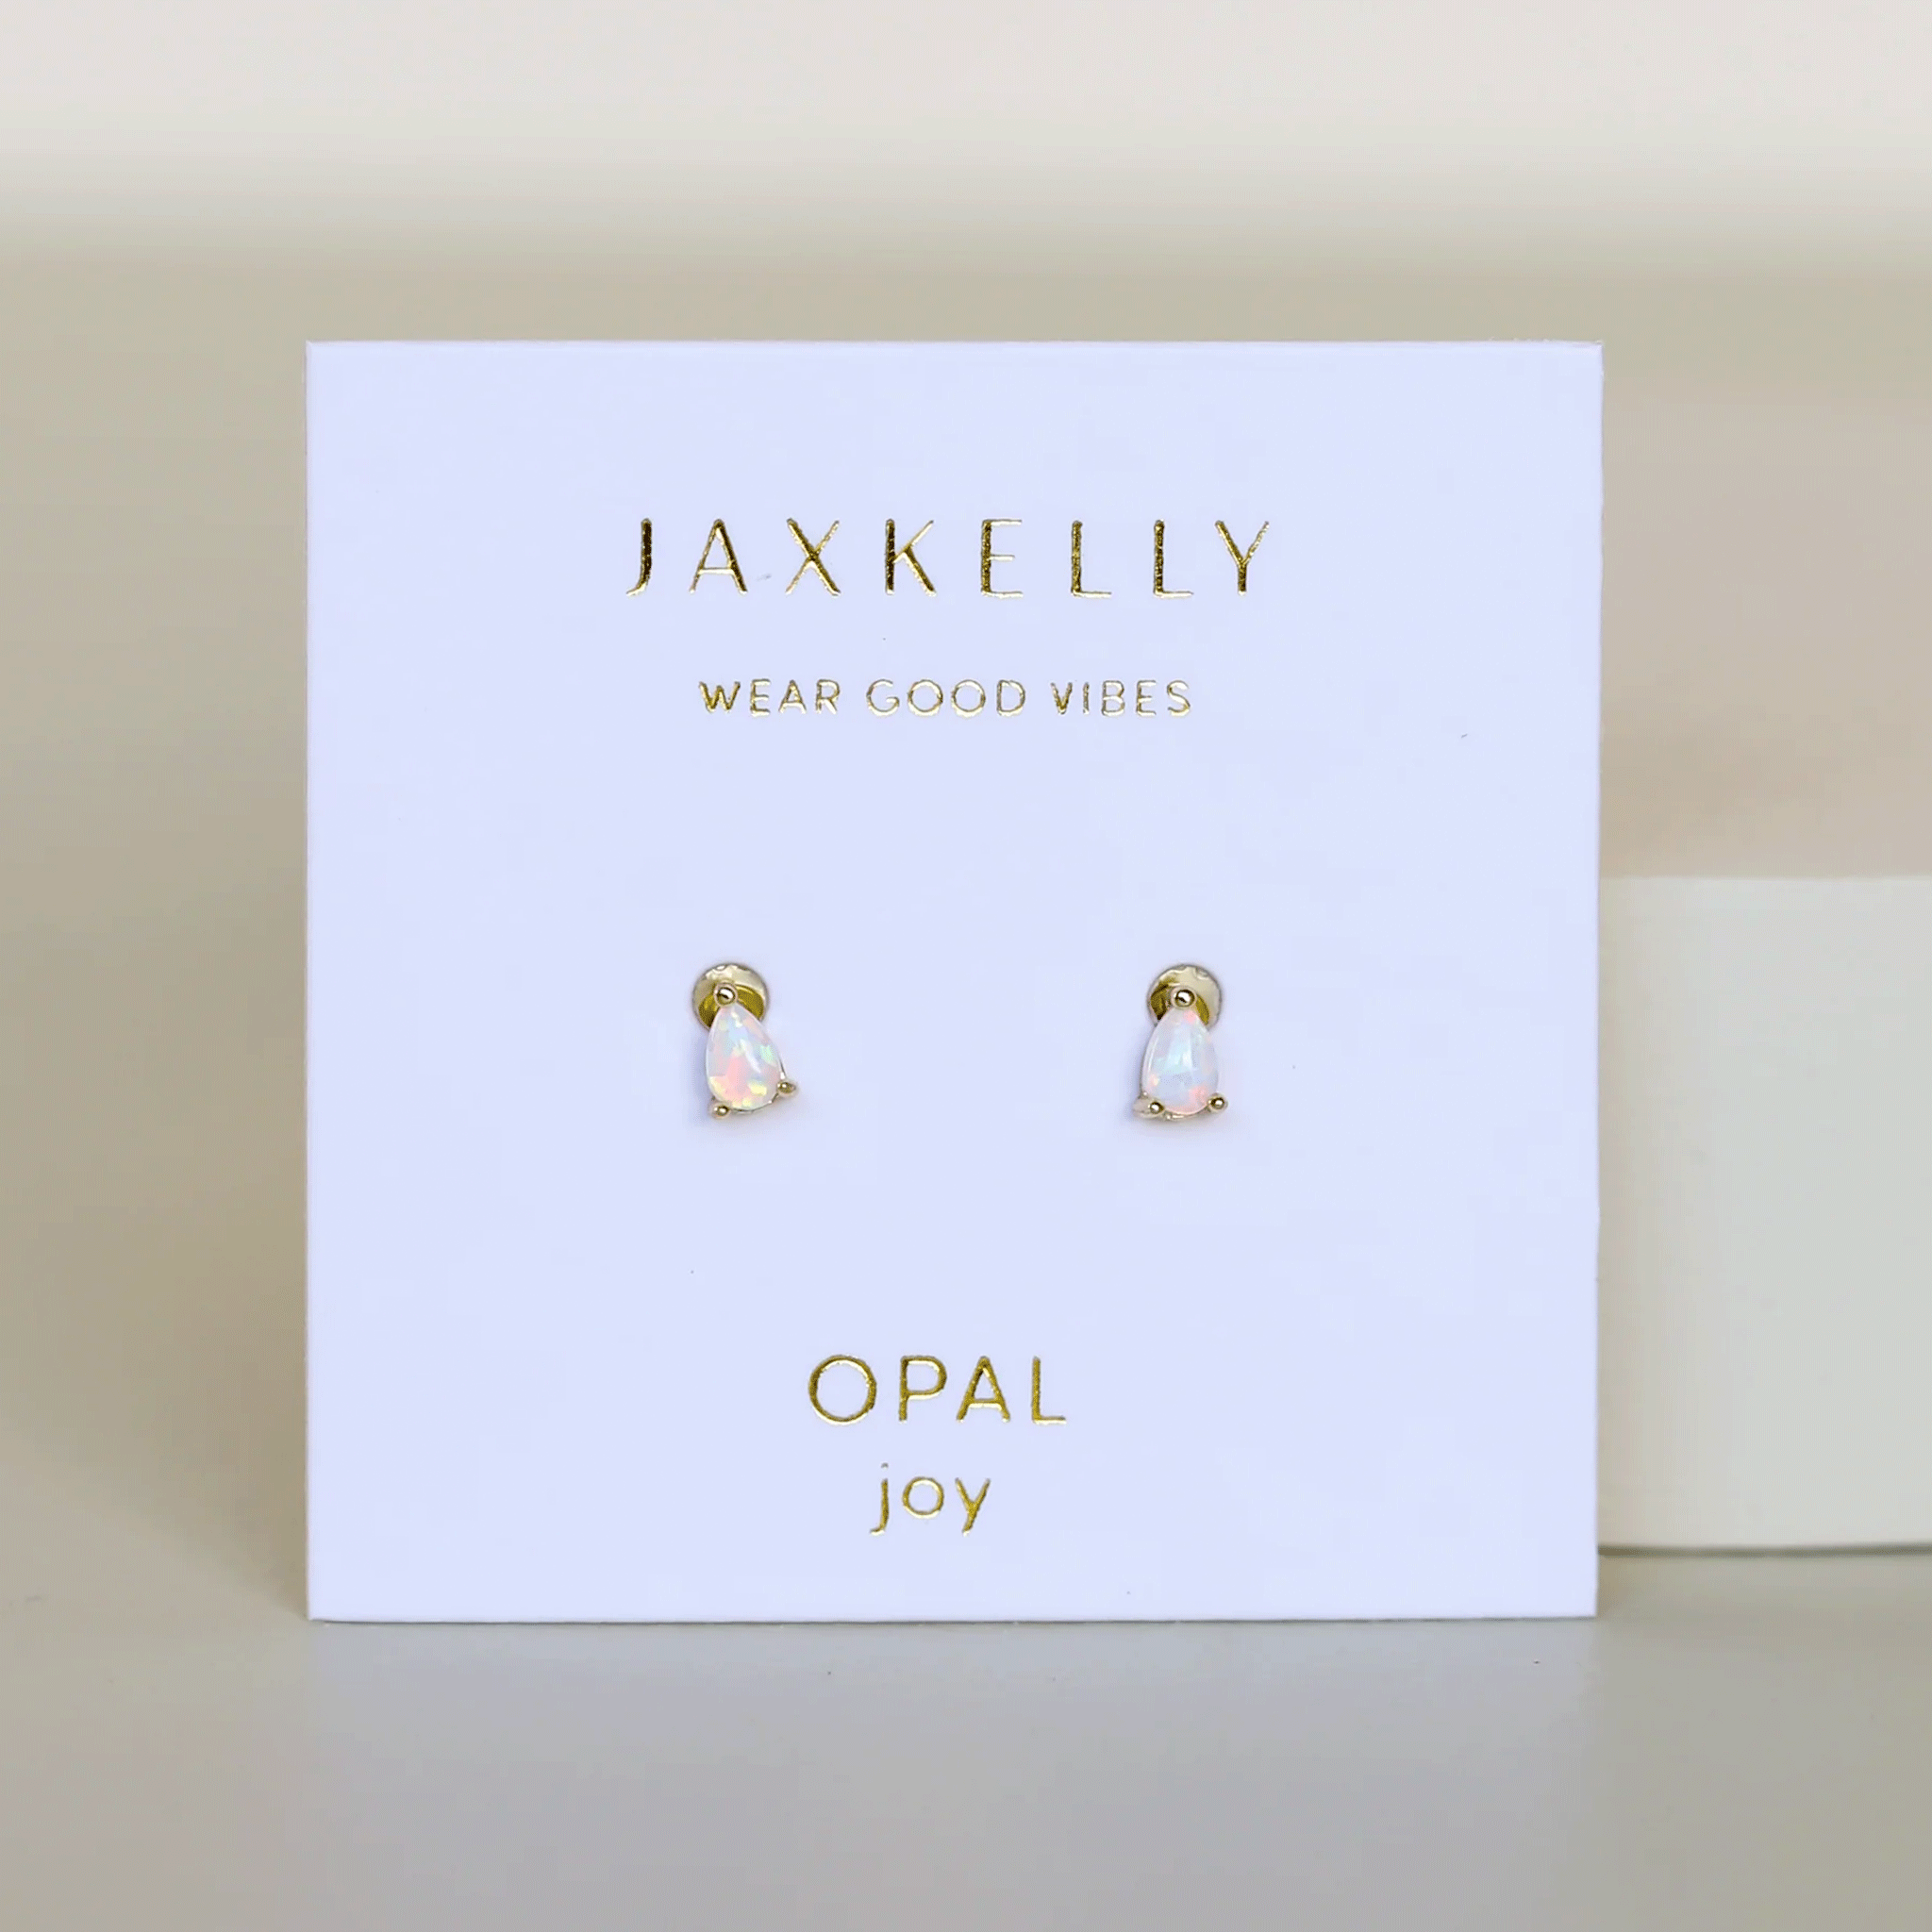 On a cream background is a small white cardboard packaging holding a pair of teardrop shaped white opal stud earrings. 